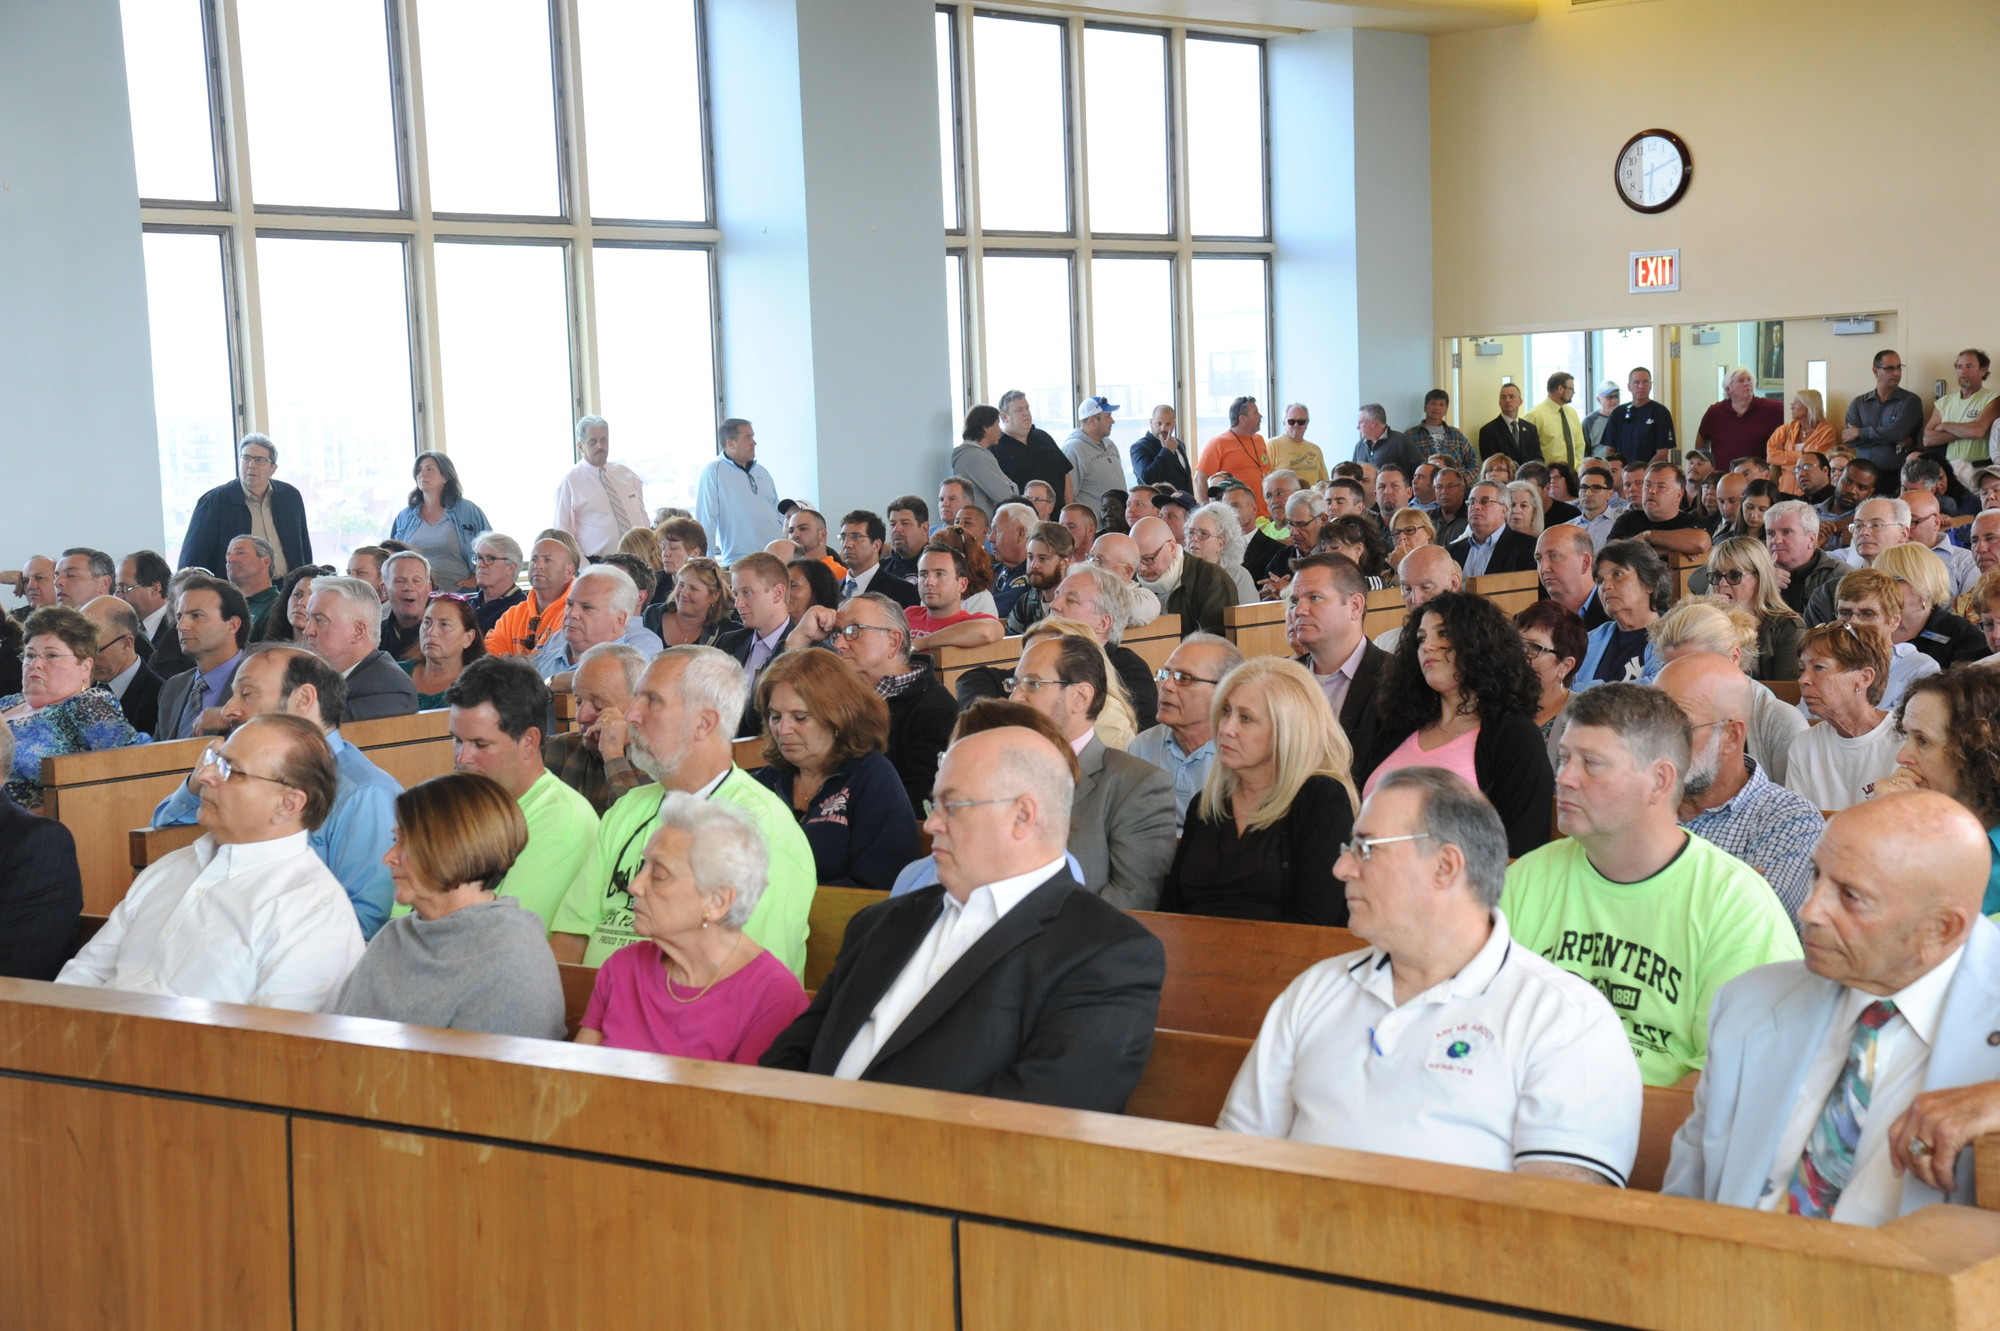 It was standing room only at City Hall last Wednesday.